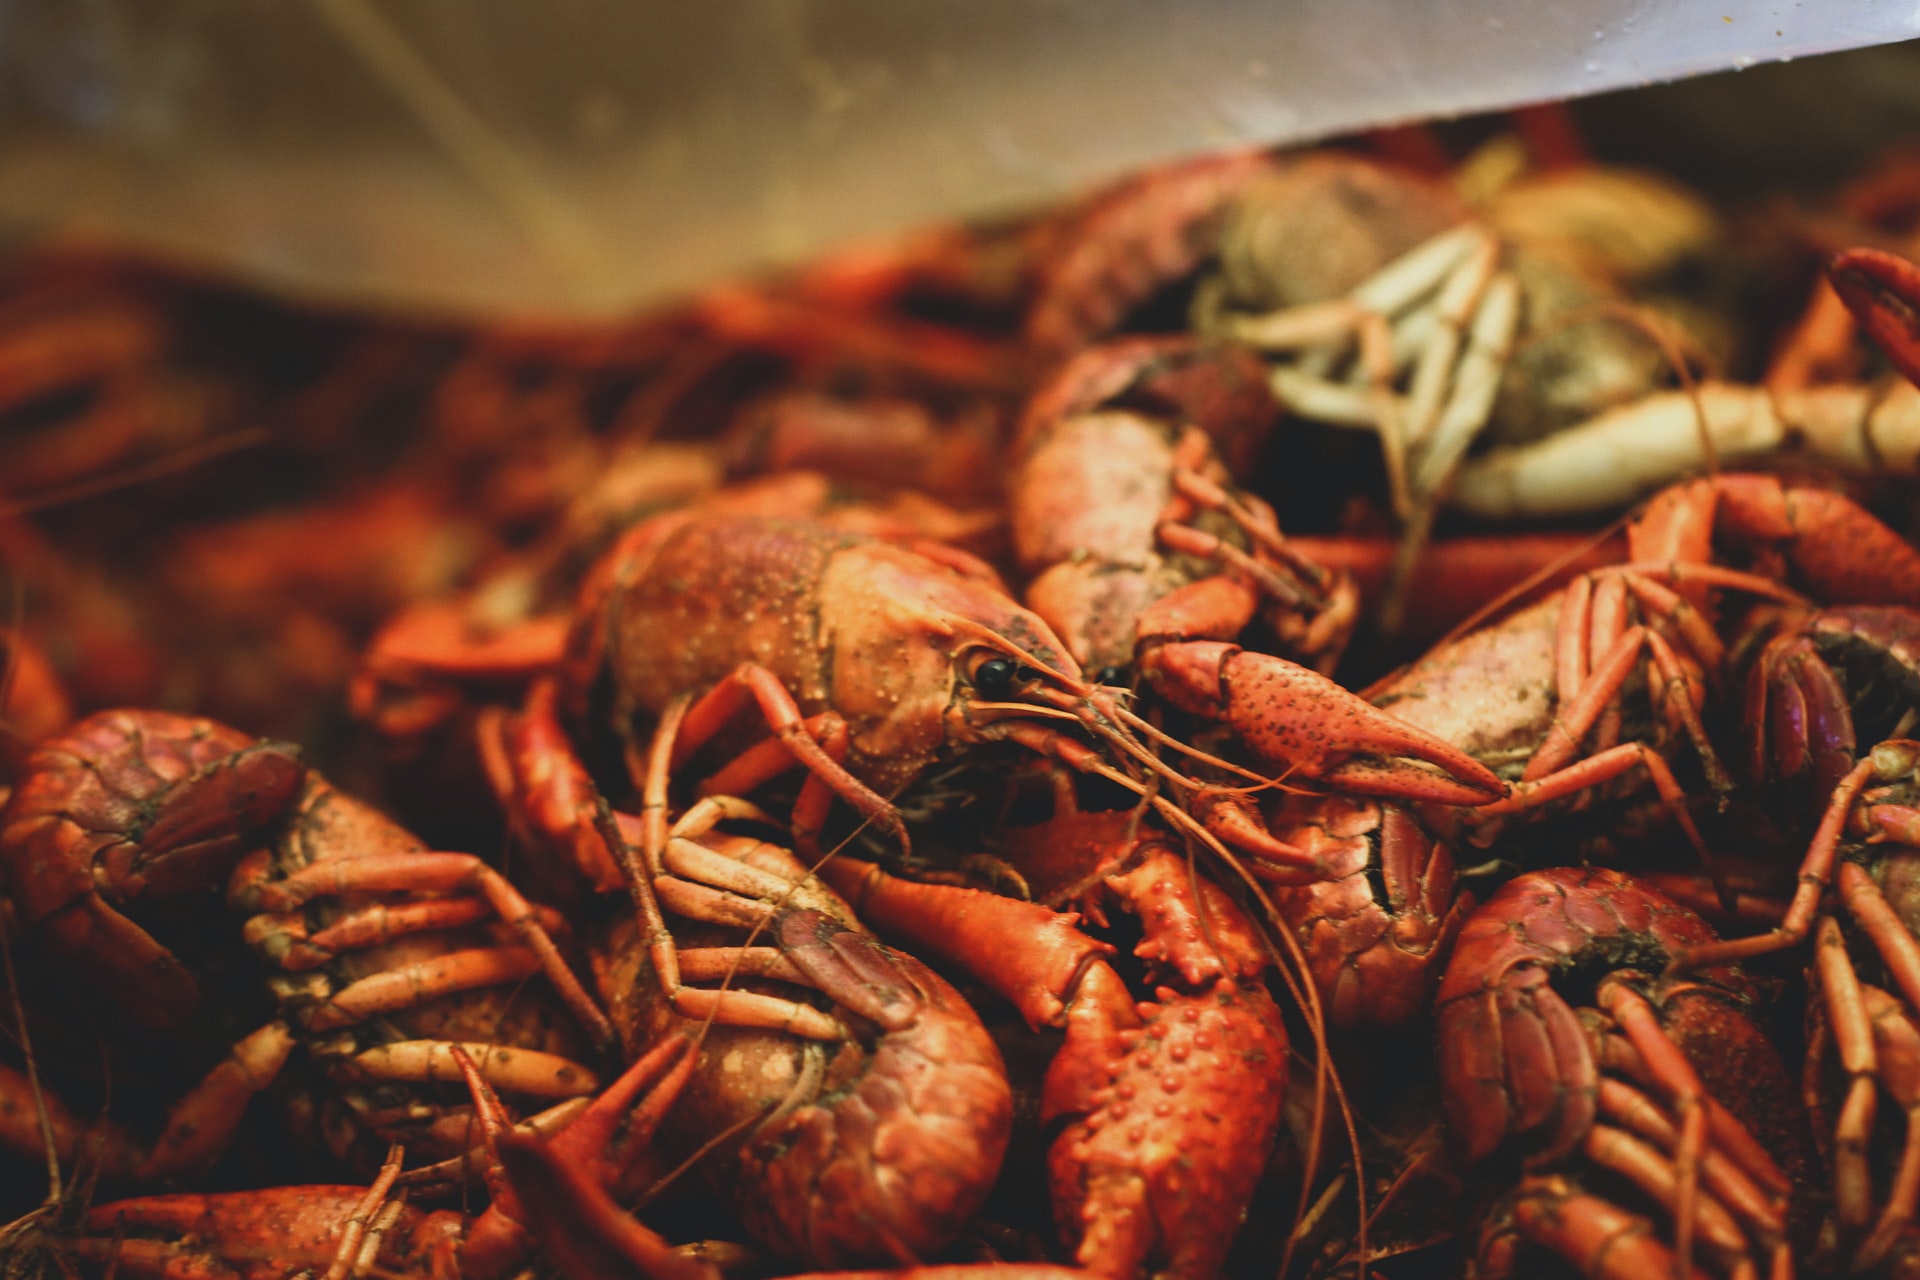 Where You Can Find The Best Cajun Food in Dallas